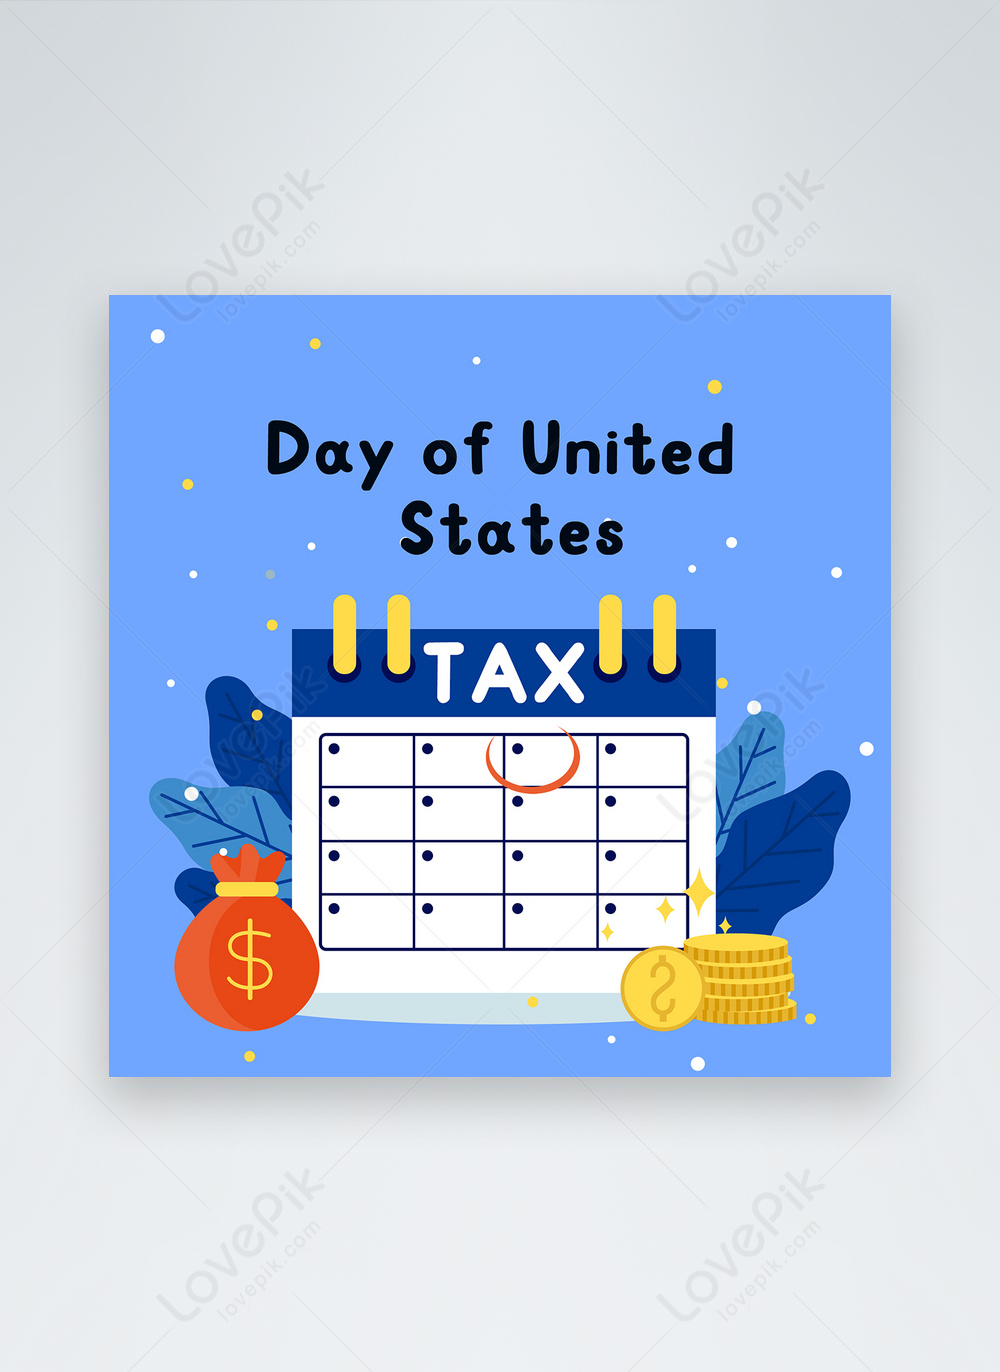 Us tax day social media post template image_picture free download